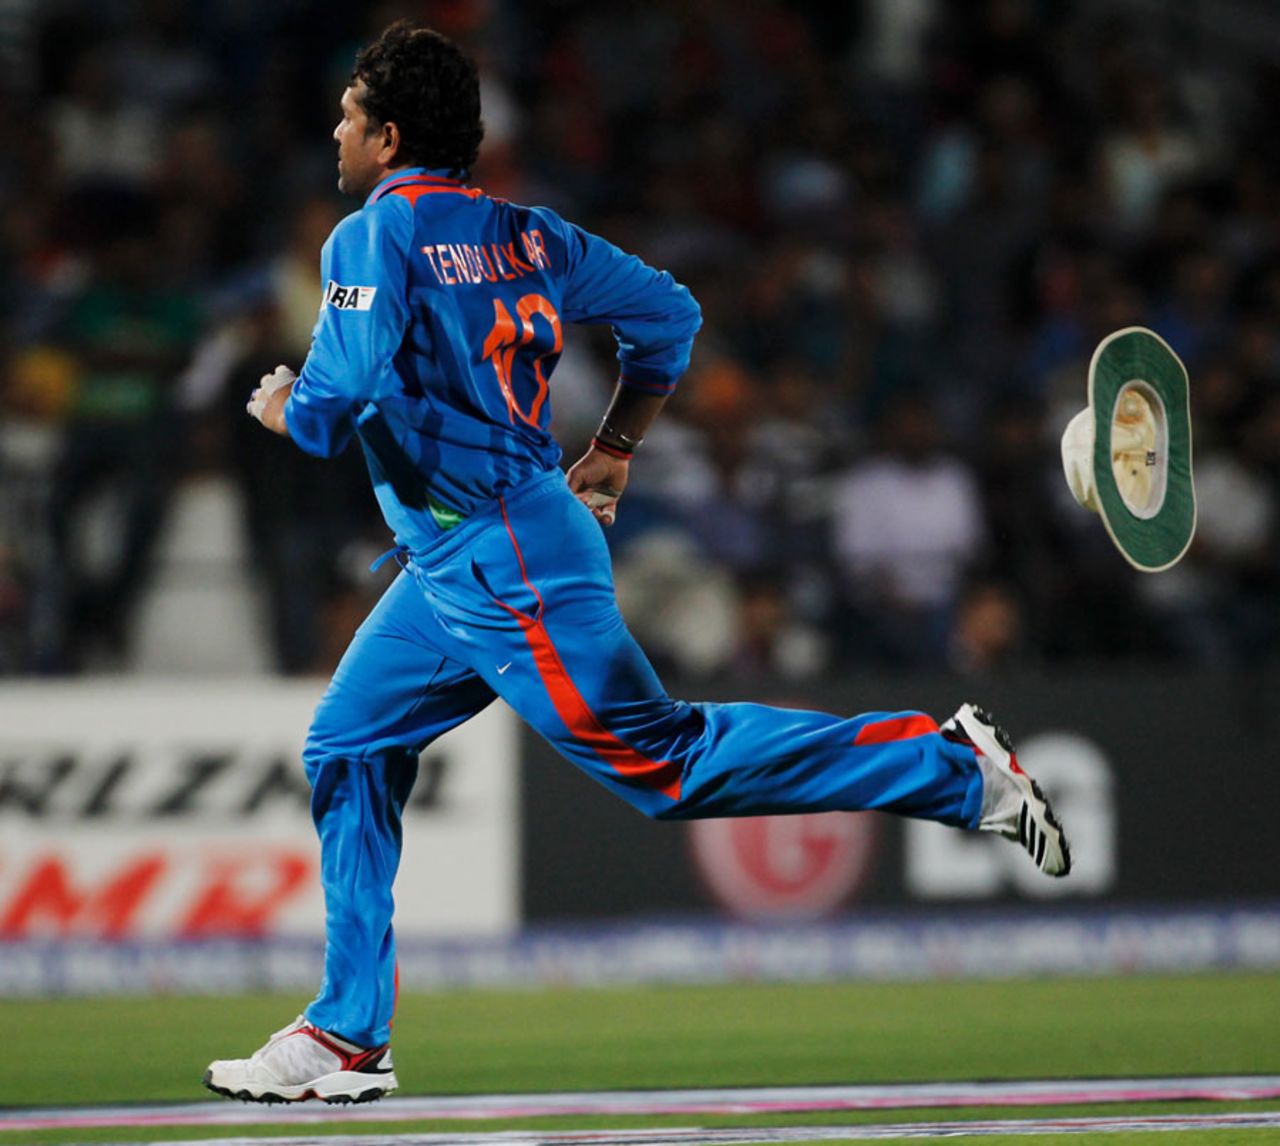 Sachin Tendulkar chases the ball in the field, India v South Africa, Group B, World Cup, Nagpur, March 12, 2011